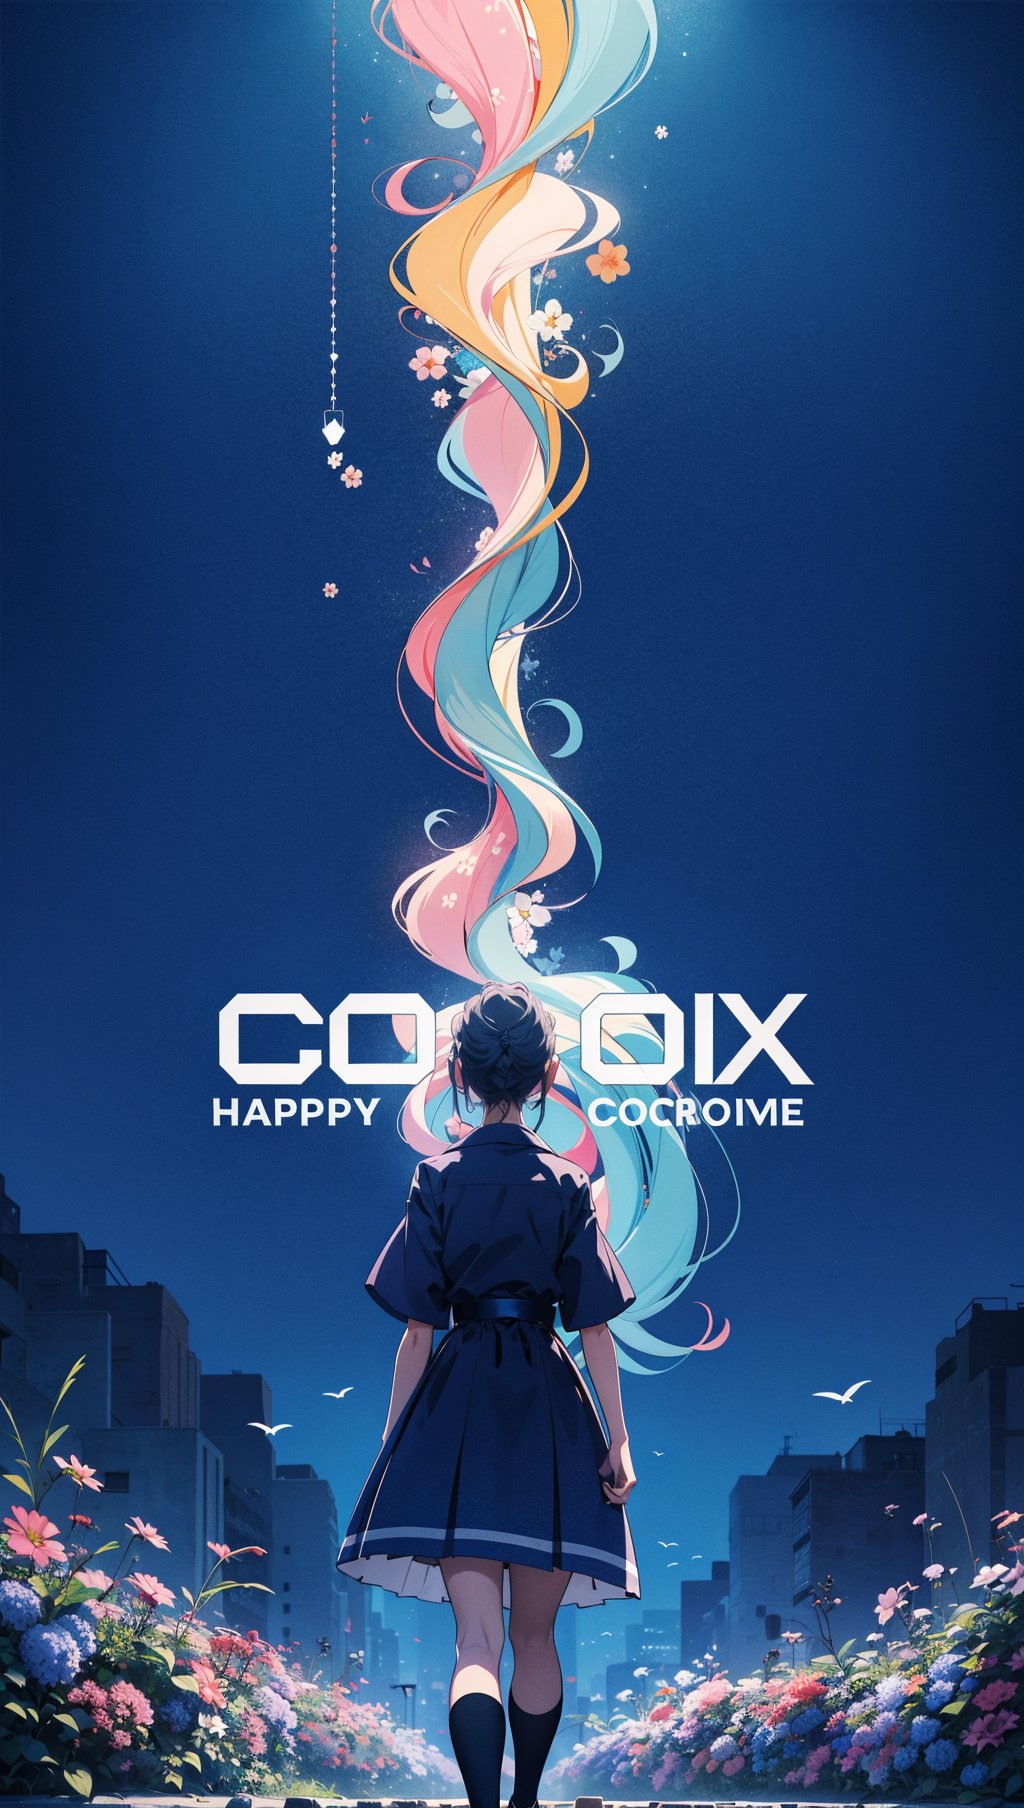 anime opening,(woman),solo,a dreamscape aesthetic in Cobalt blue theme atmosphere,mosaic background,happy,floral,(wallpaper style),movie trailer,cinematic,screencap,still shot,true perception,comfortable,